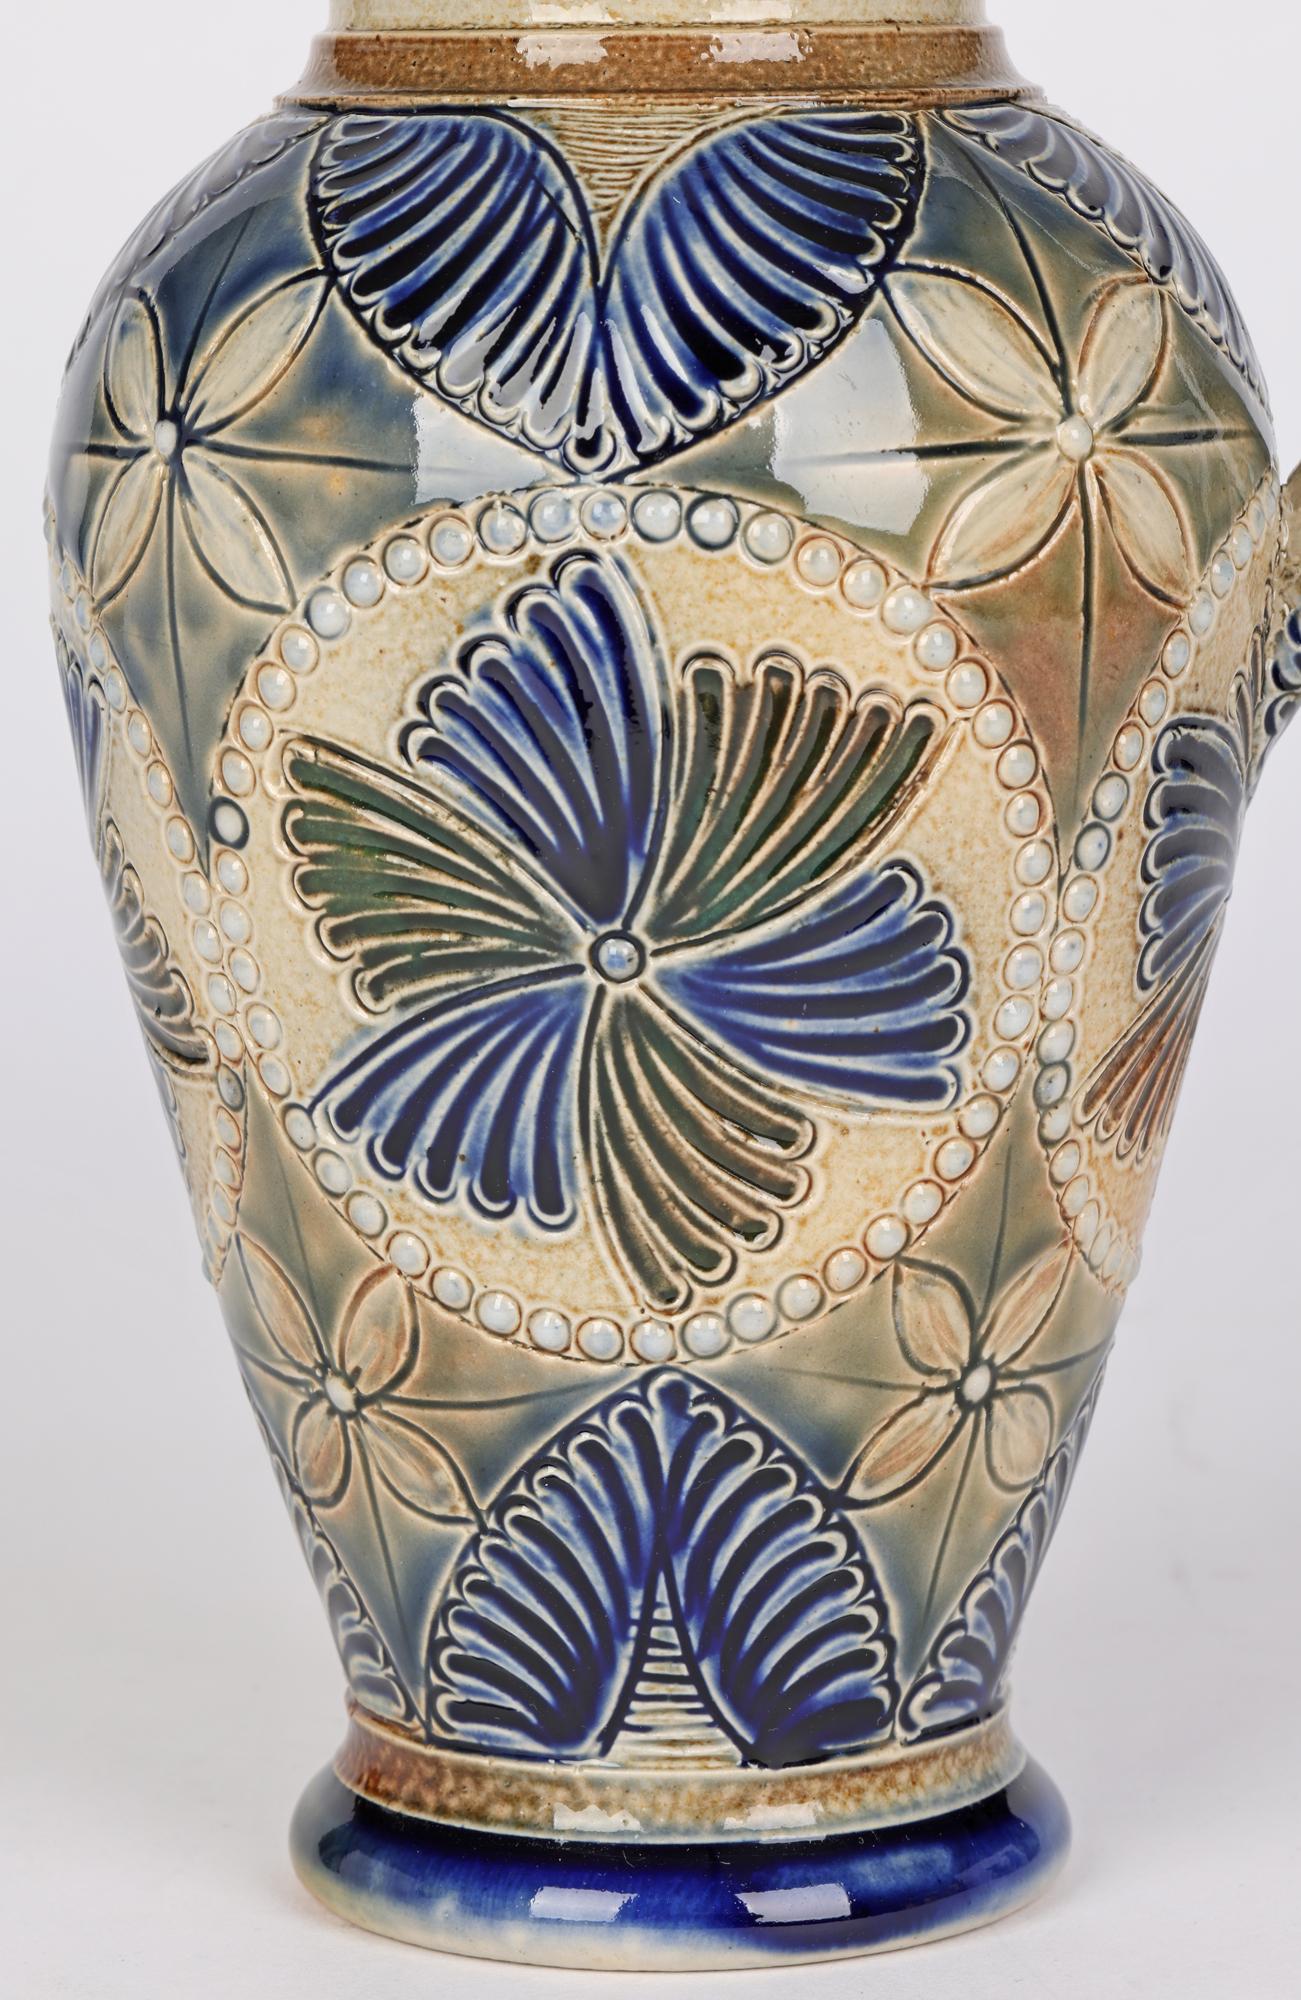 A good and finely decorated Aesthetic Movement stoneware jug decorated with fan shape and floral designs by John Pollard Seddon and dating from around 1880. The jug stands on a round foot with a tall bulbous shaped body and narrow funnel shaped neck